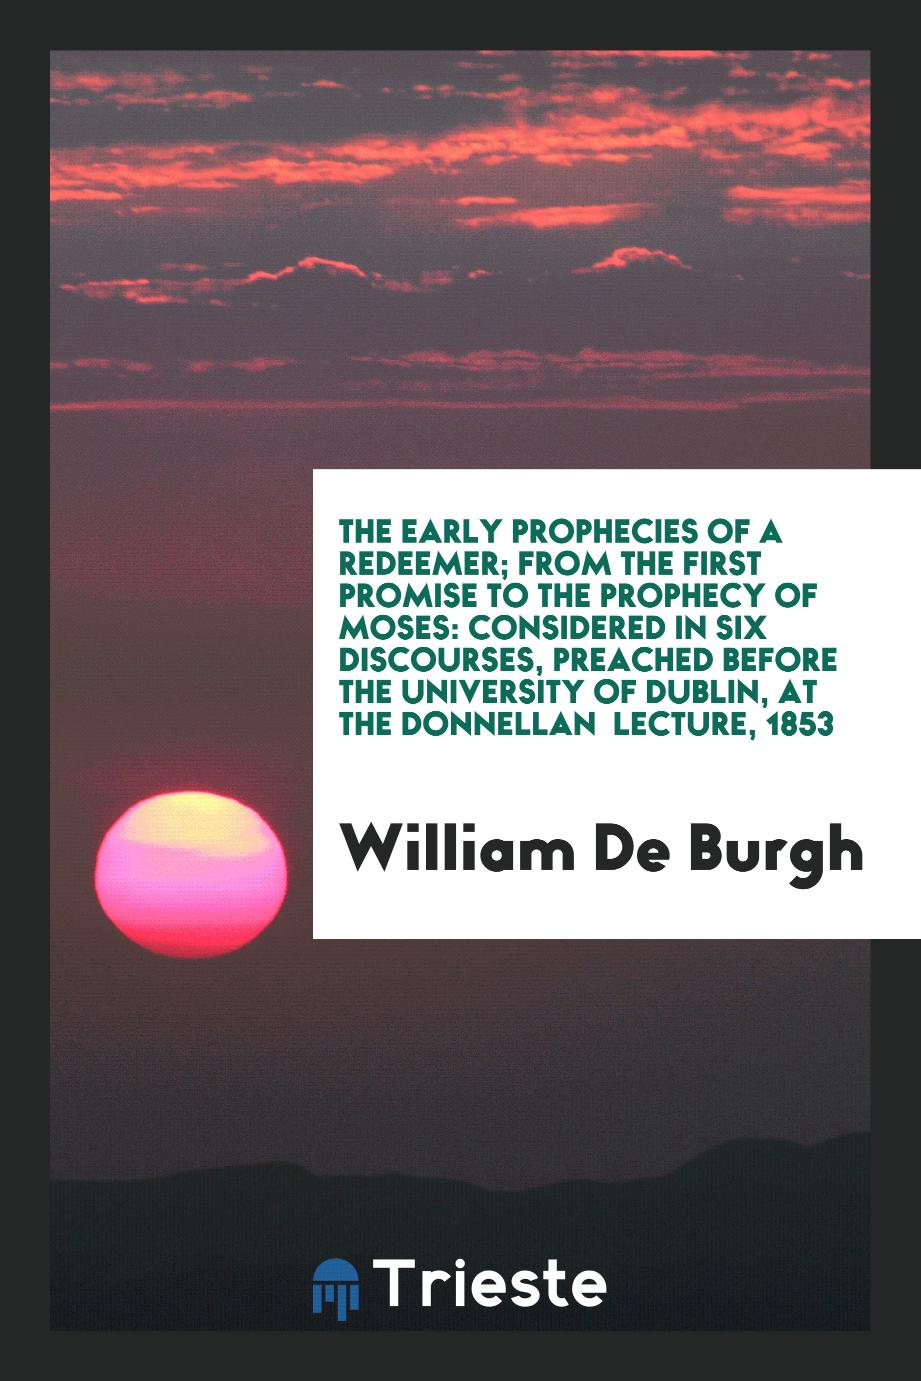 William De Burgh - The Early Prophecies of a Redeemer; From the First Promise to the Prophecy of Moses: Considered in Six Discourses, Preached before the University of Dublin, at the Donnellan Lecture, 1853